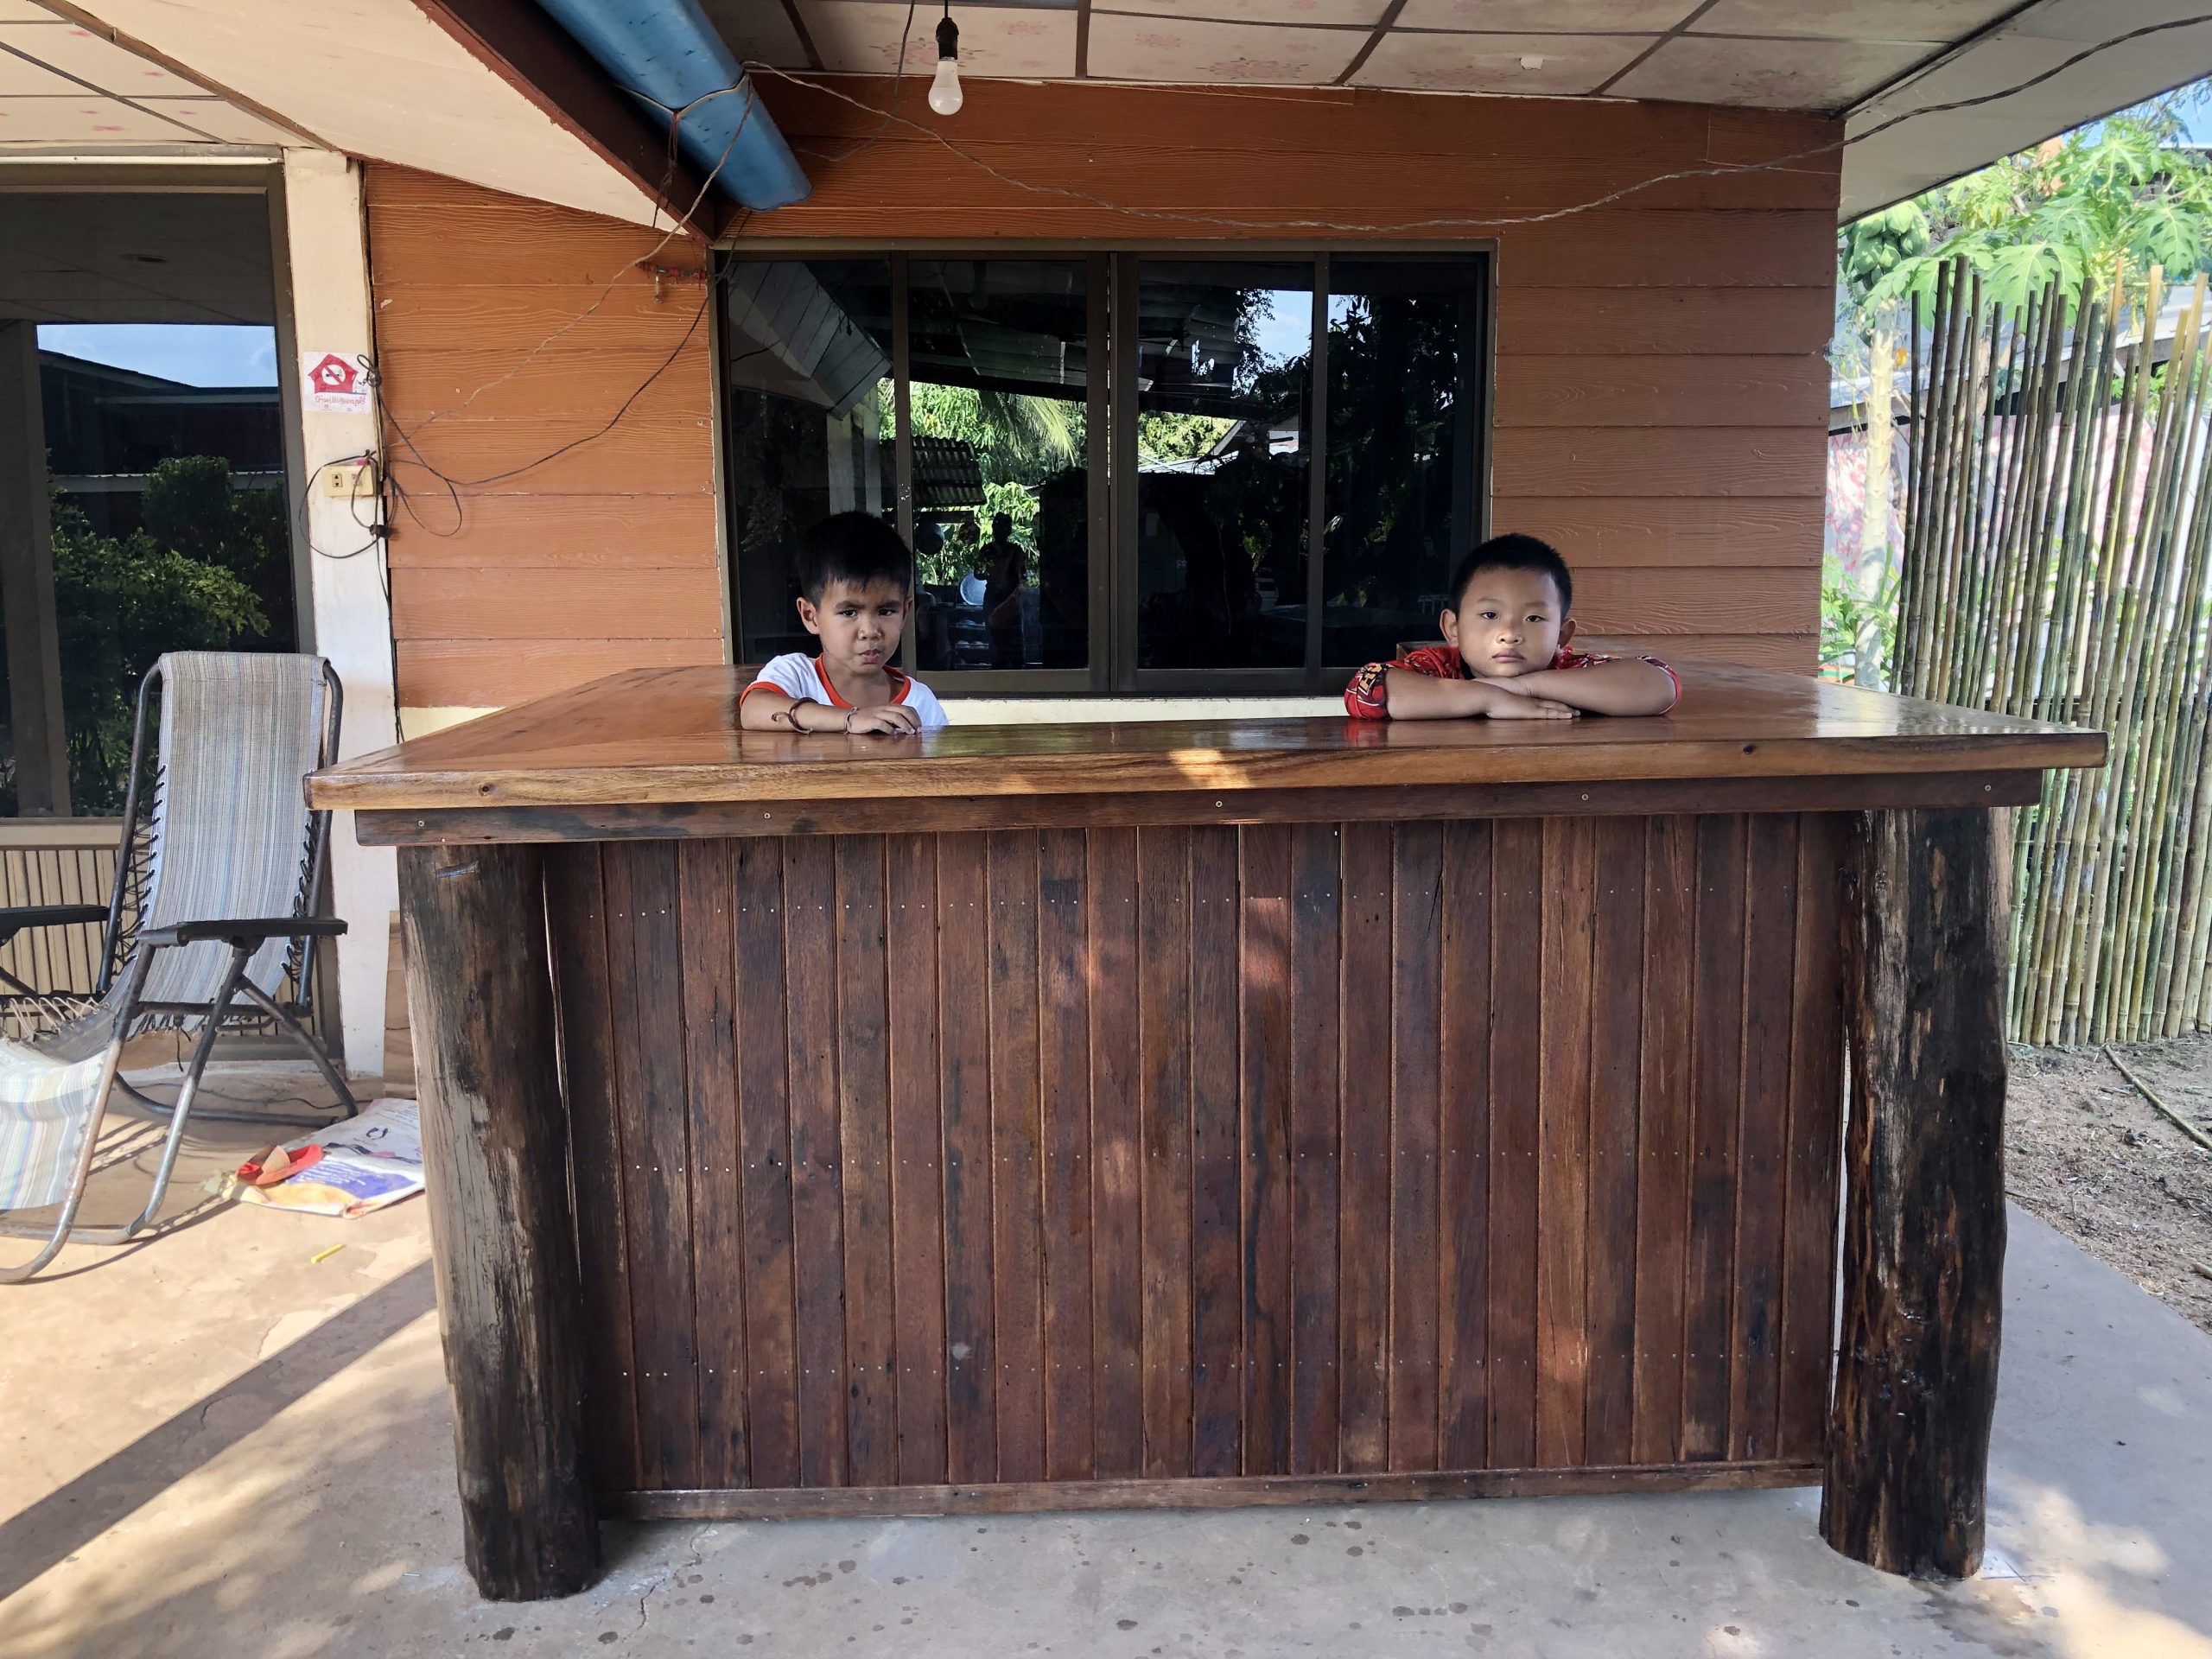 The bar gets proofed by the kids